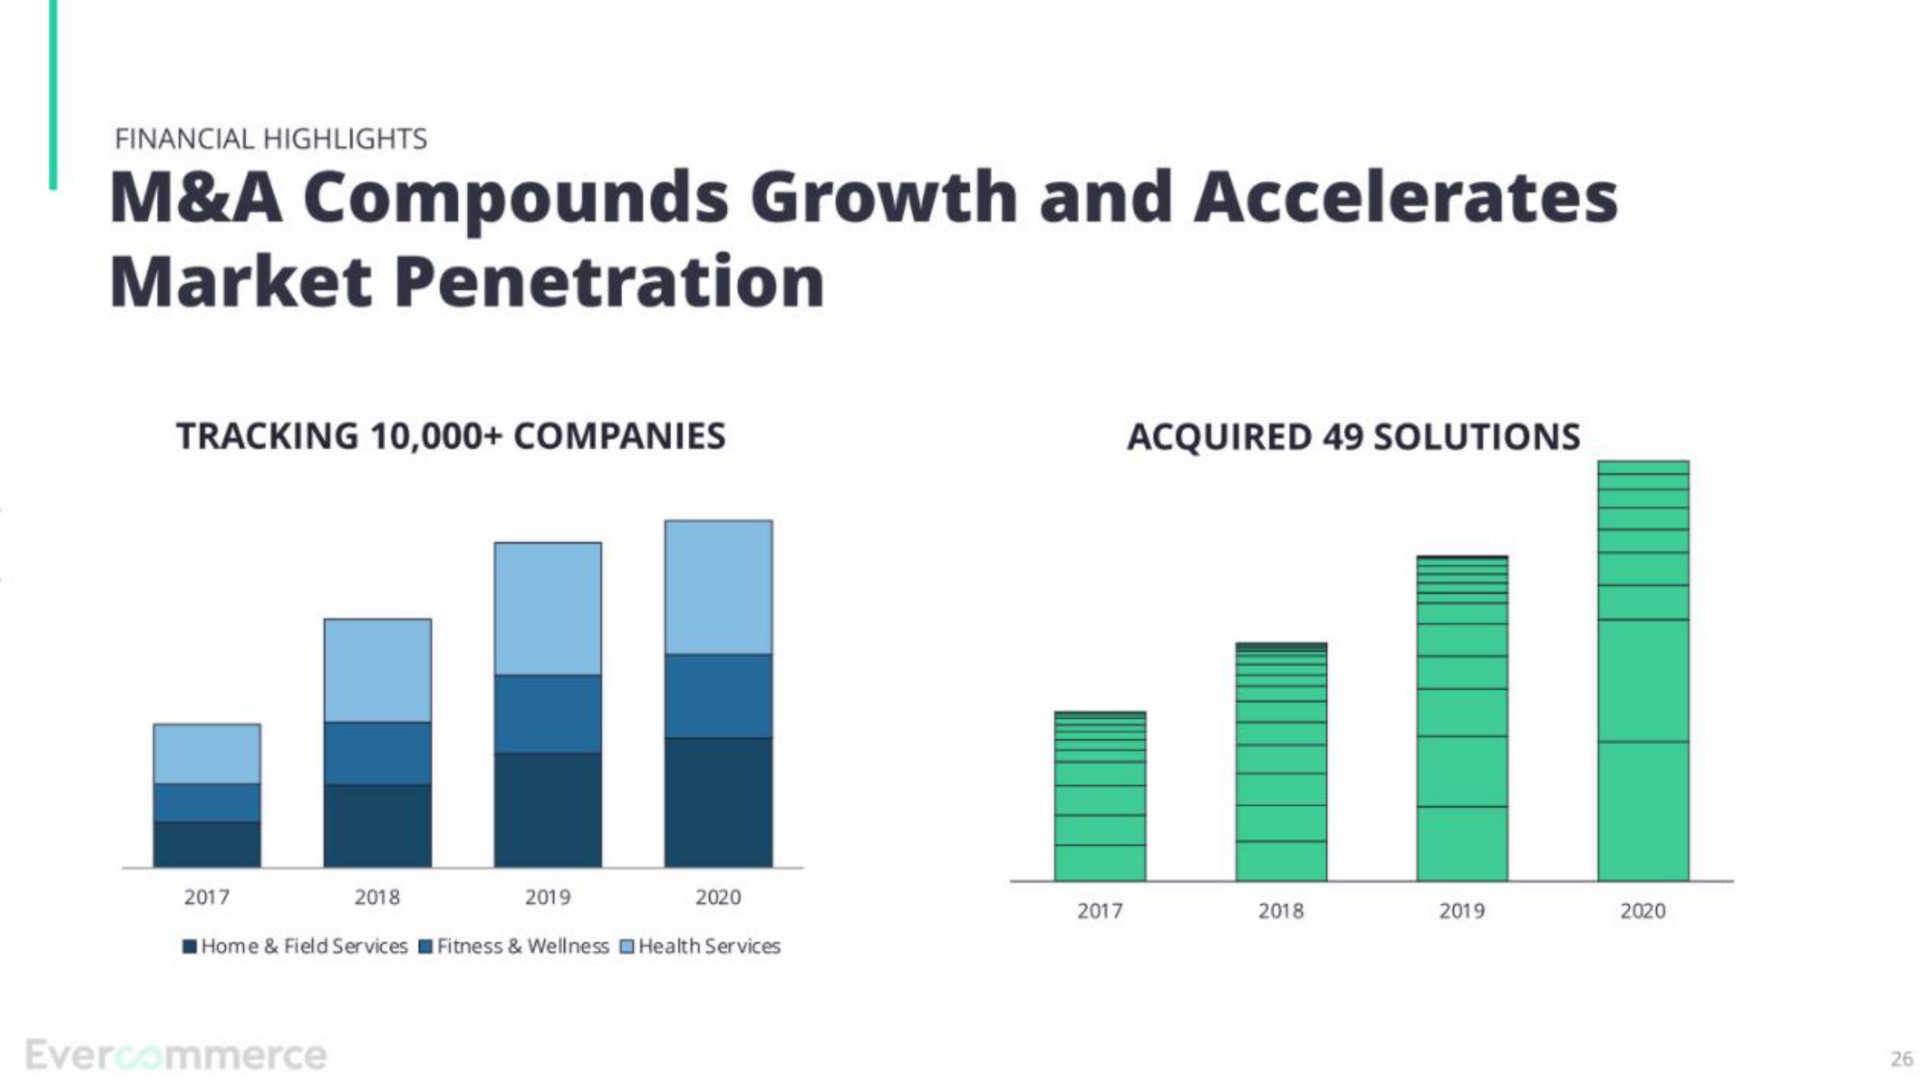 a compounds growth and accelerates market penetration | EverCommerce